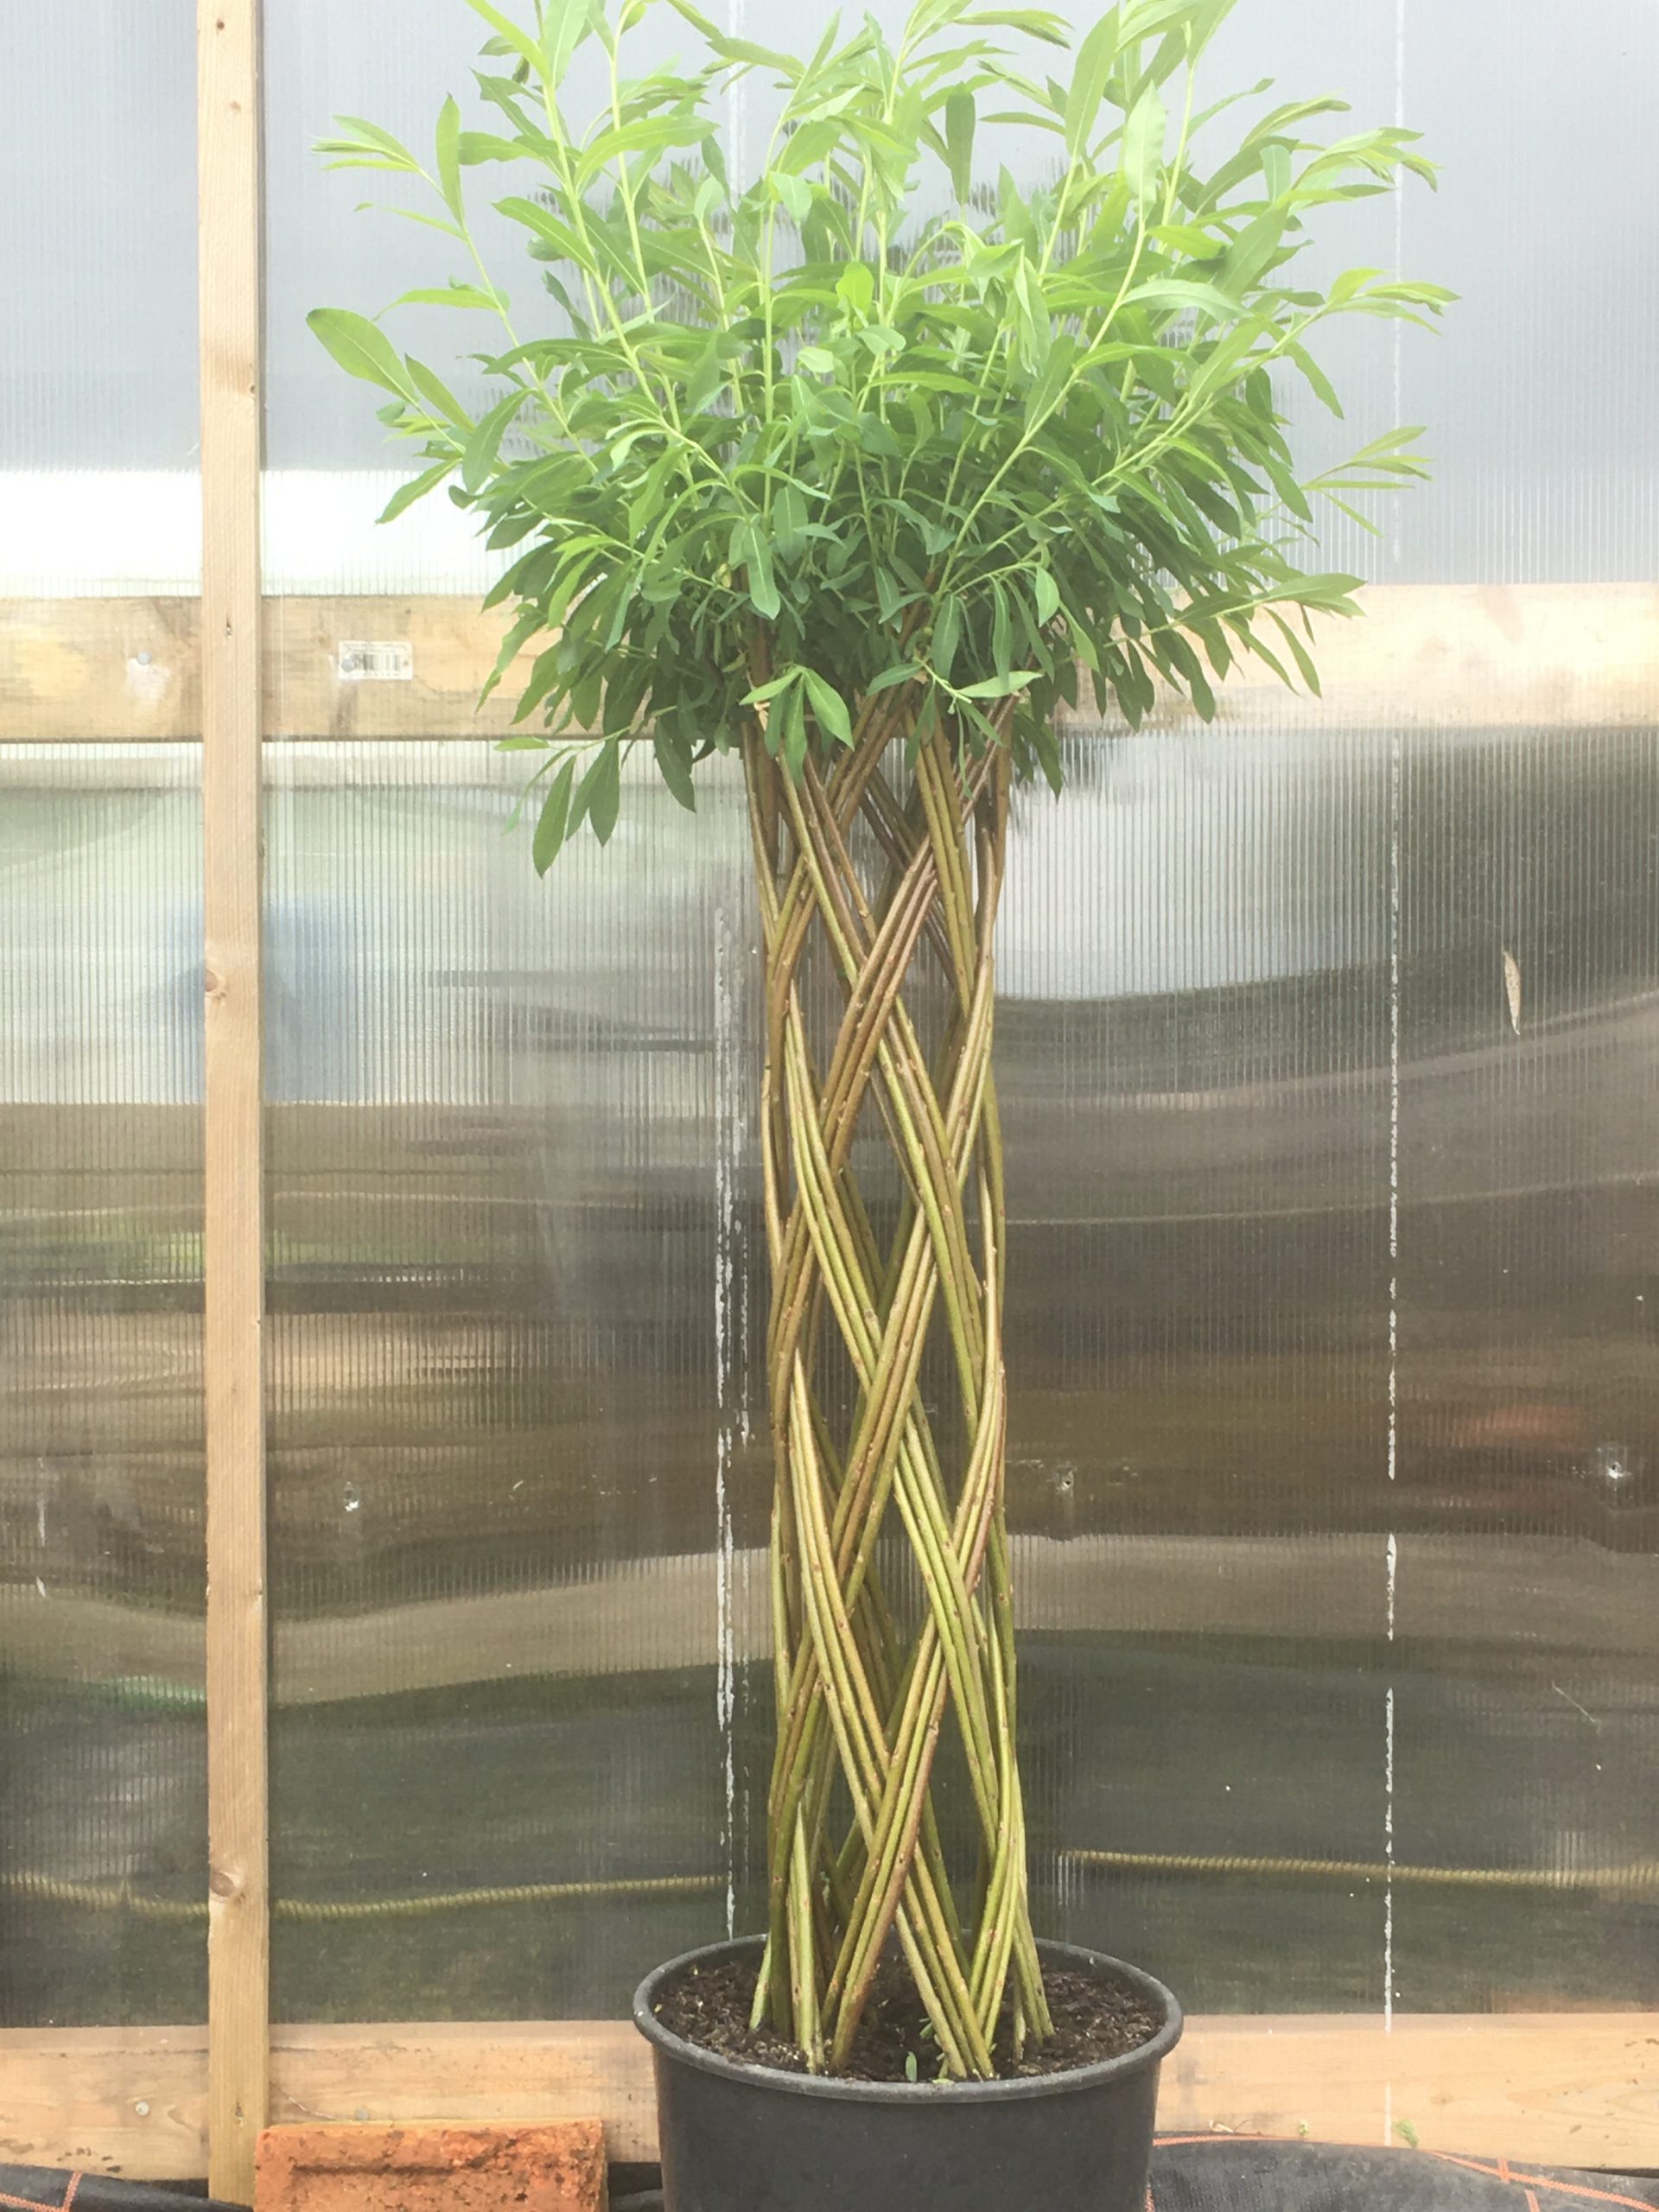 Braided Harlequin willow tree kit from Willows Nursery